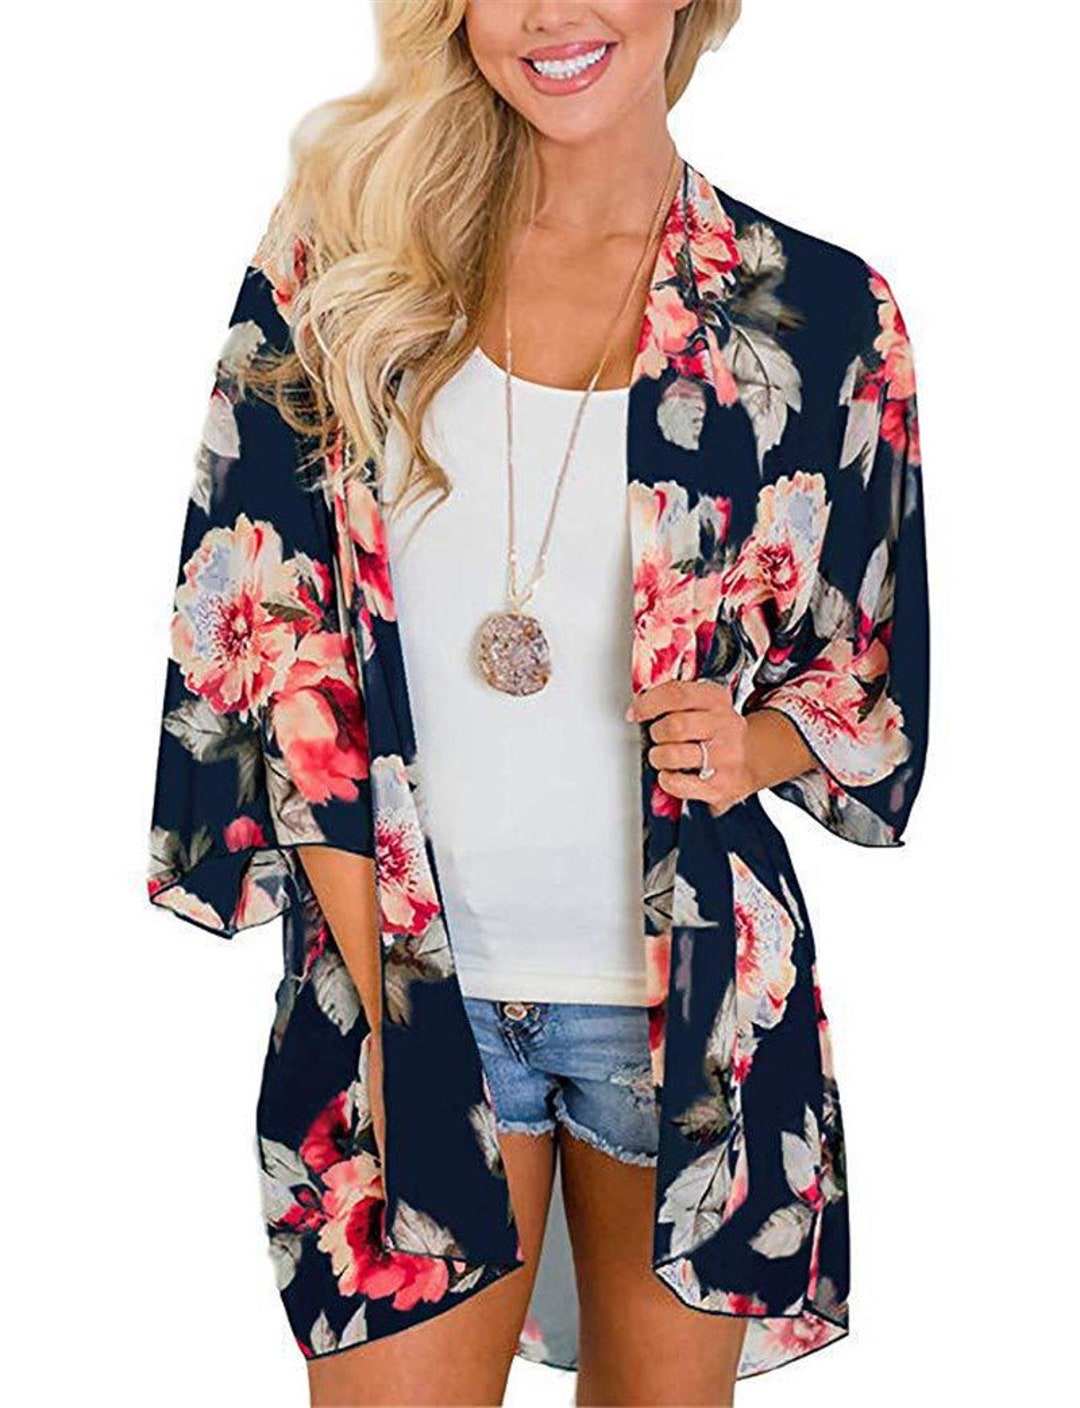 Kimono Bohemian Kimono With Colorful Floral Patterncover-up - Etsy